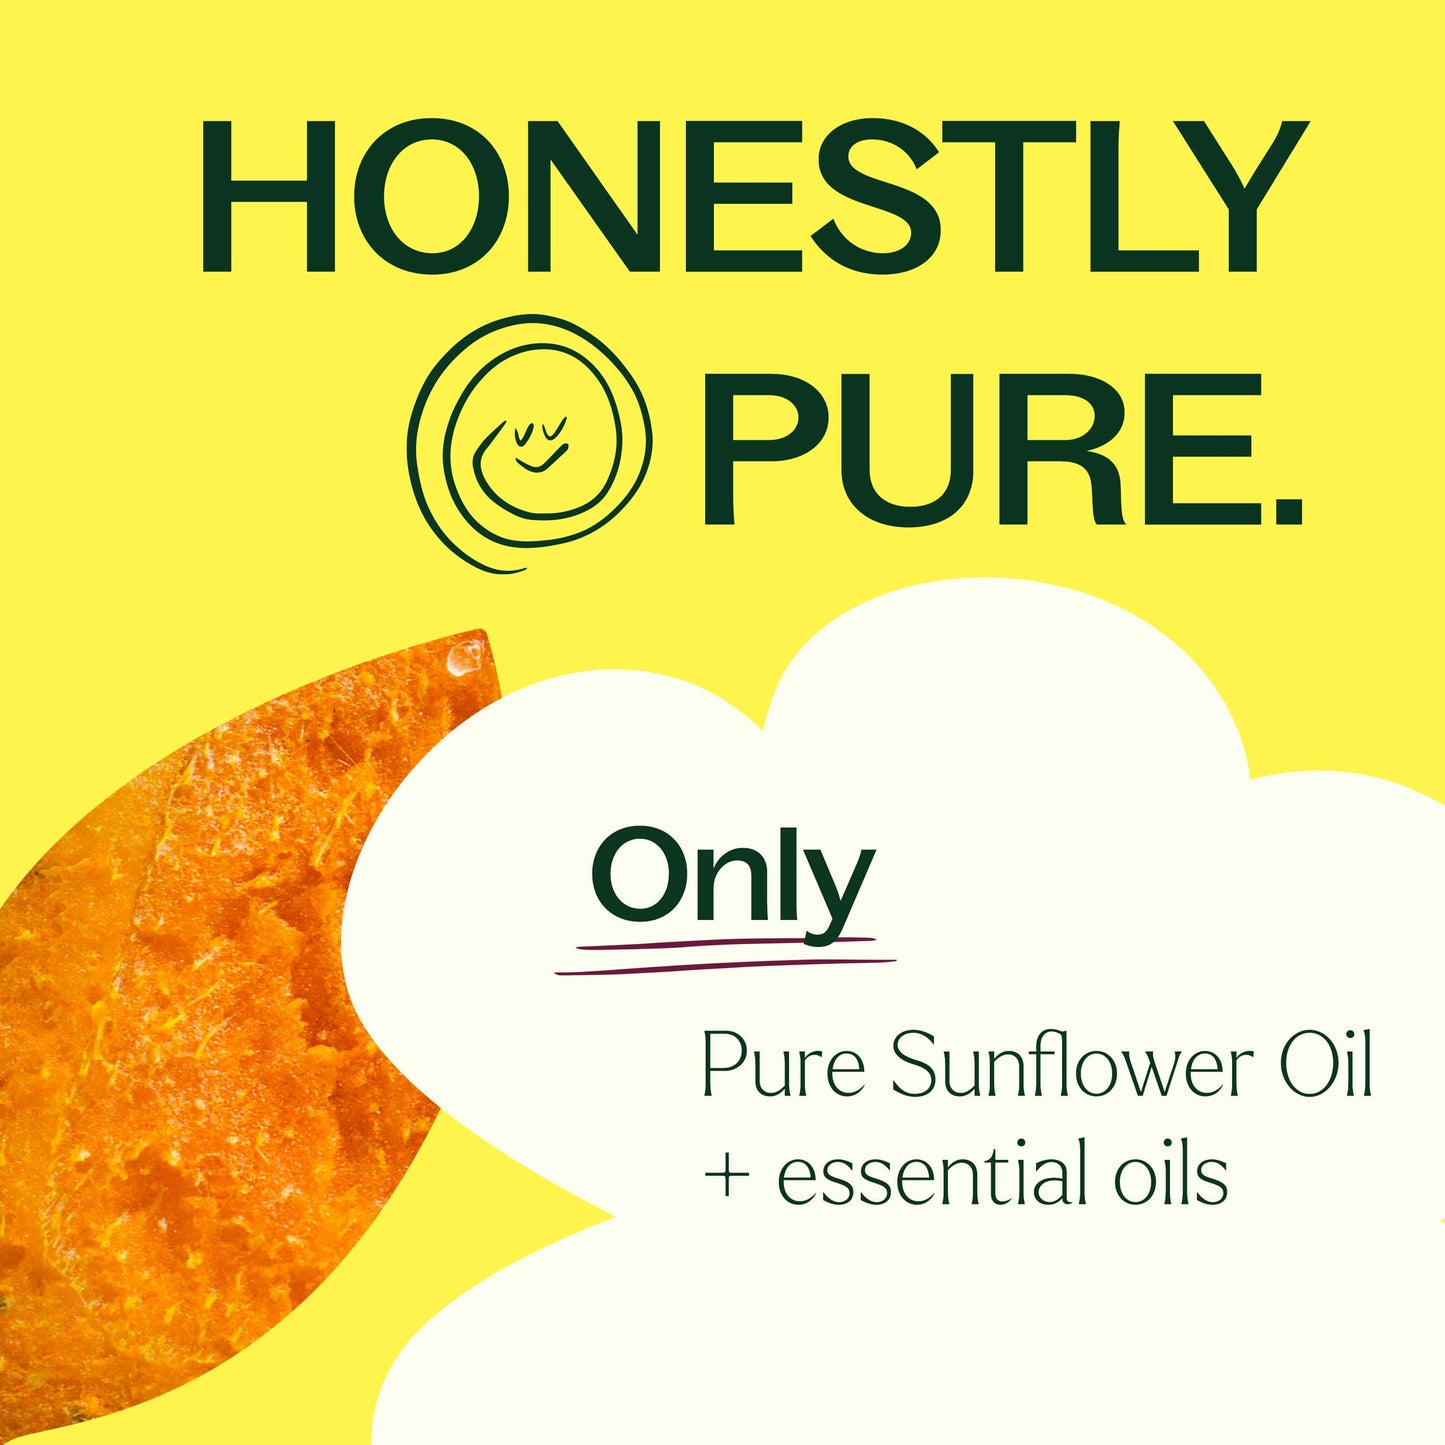 Soft Skin Body Oil is honestly pure with only pure sunflower oil with essential oil